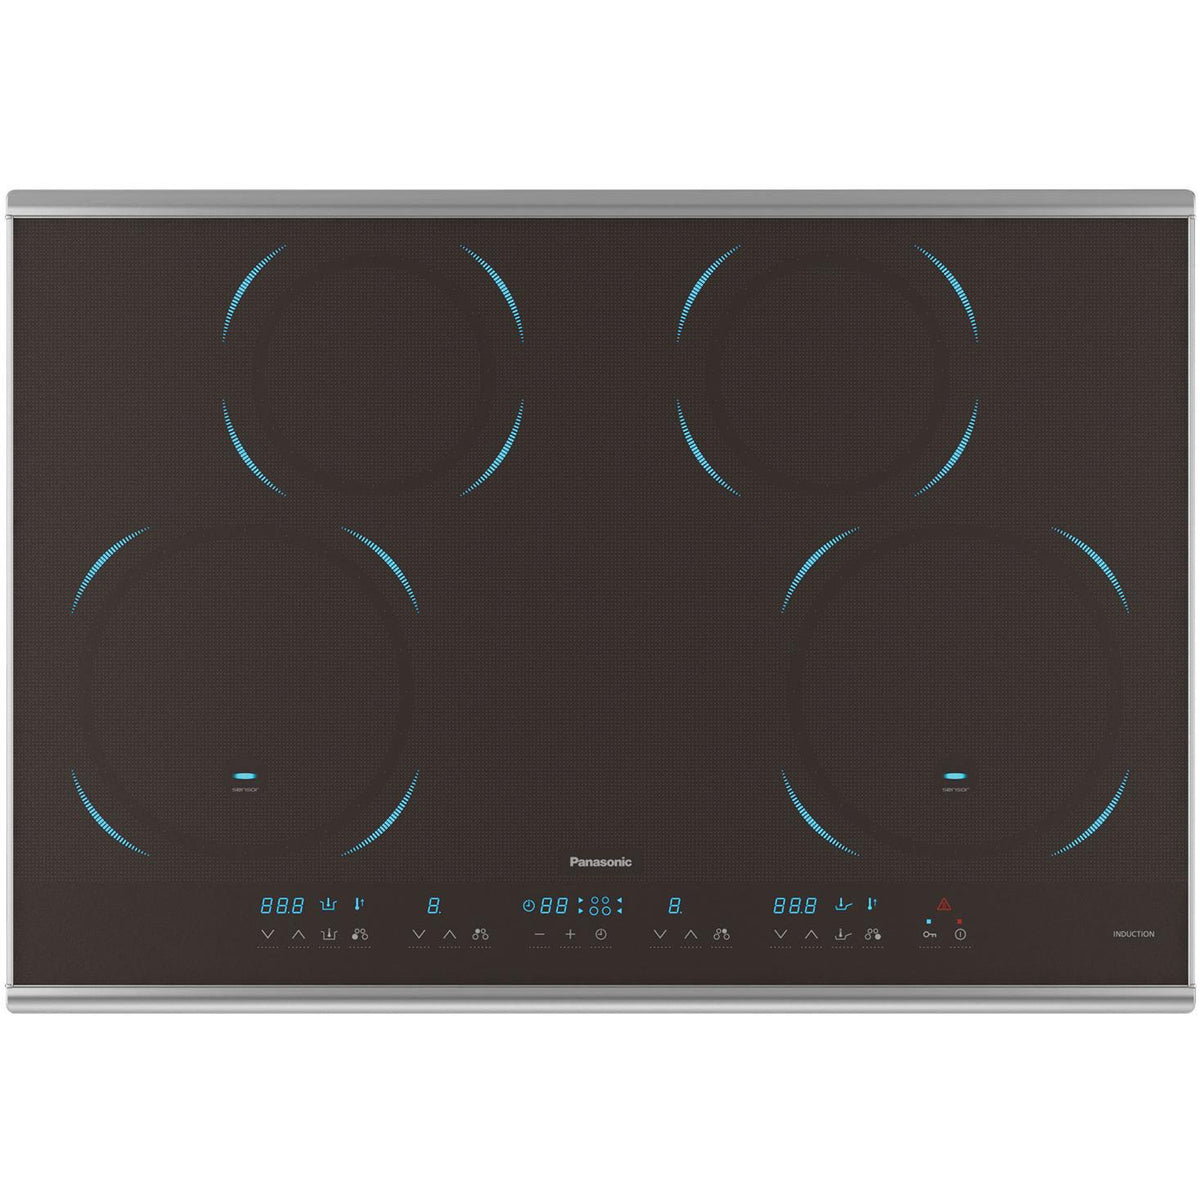 Panasonic 30-inch Built-in Induction Cooktop KY-B84AX IMAGE 1